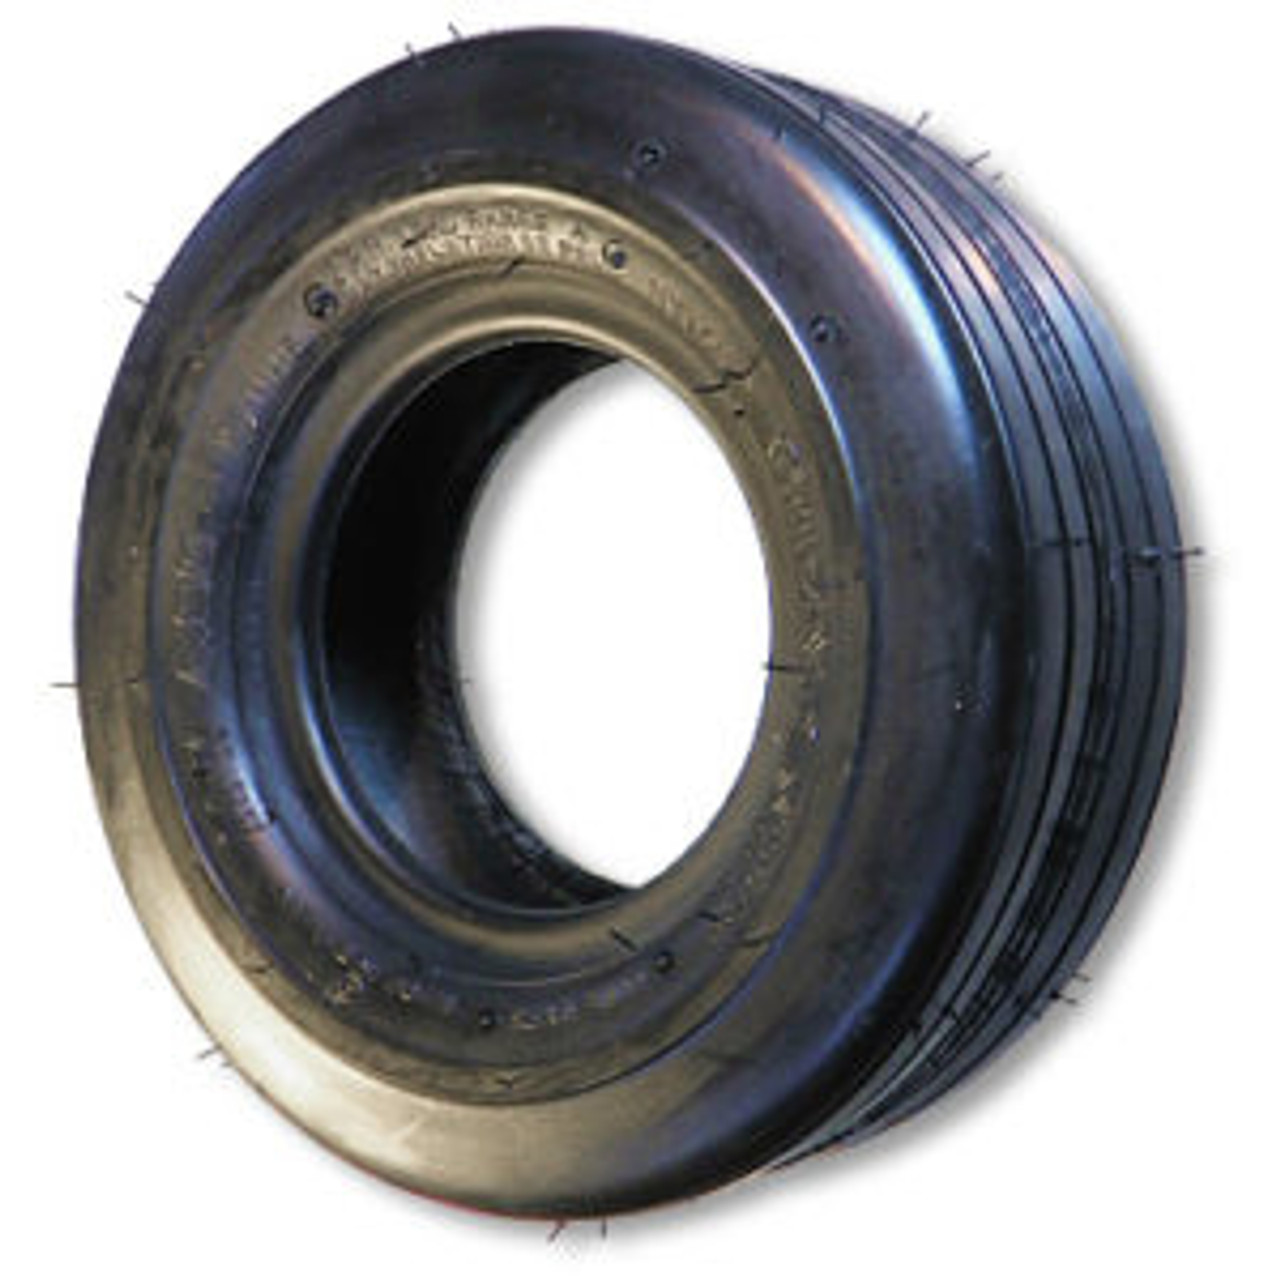 18-850 X 8 Ribbed Tire, 4 Ply, 8.0" Wide, 16.5" OD, Flat Profile